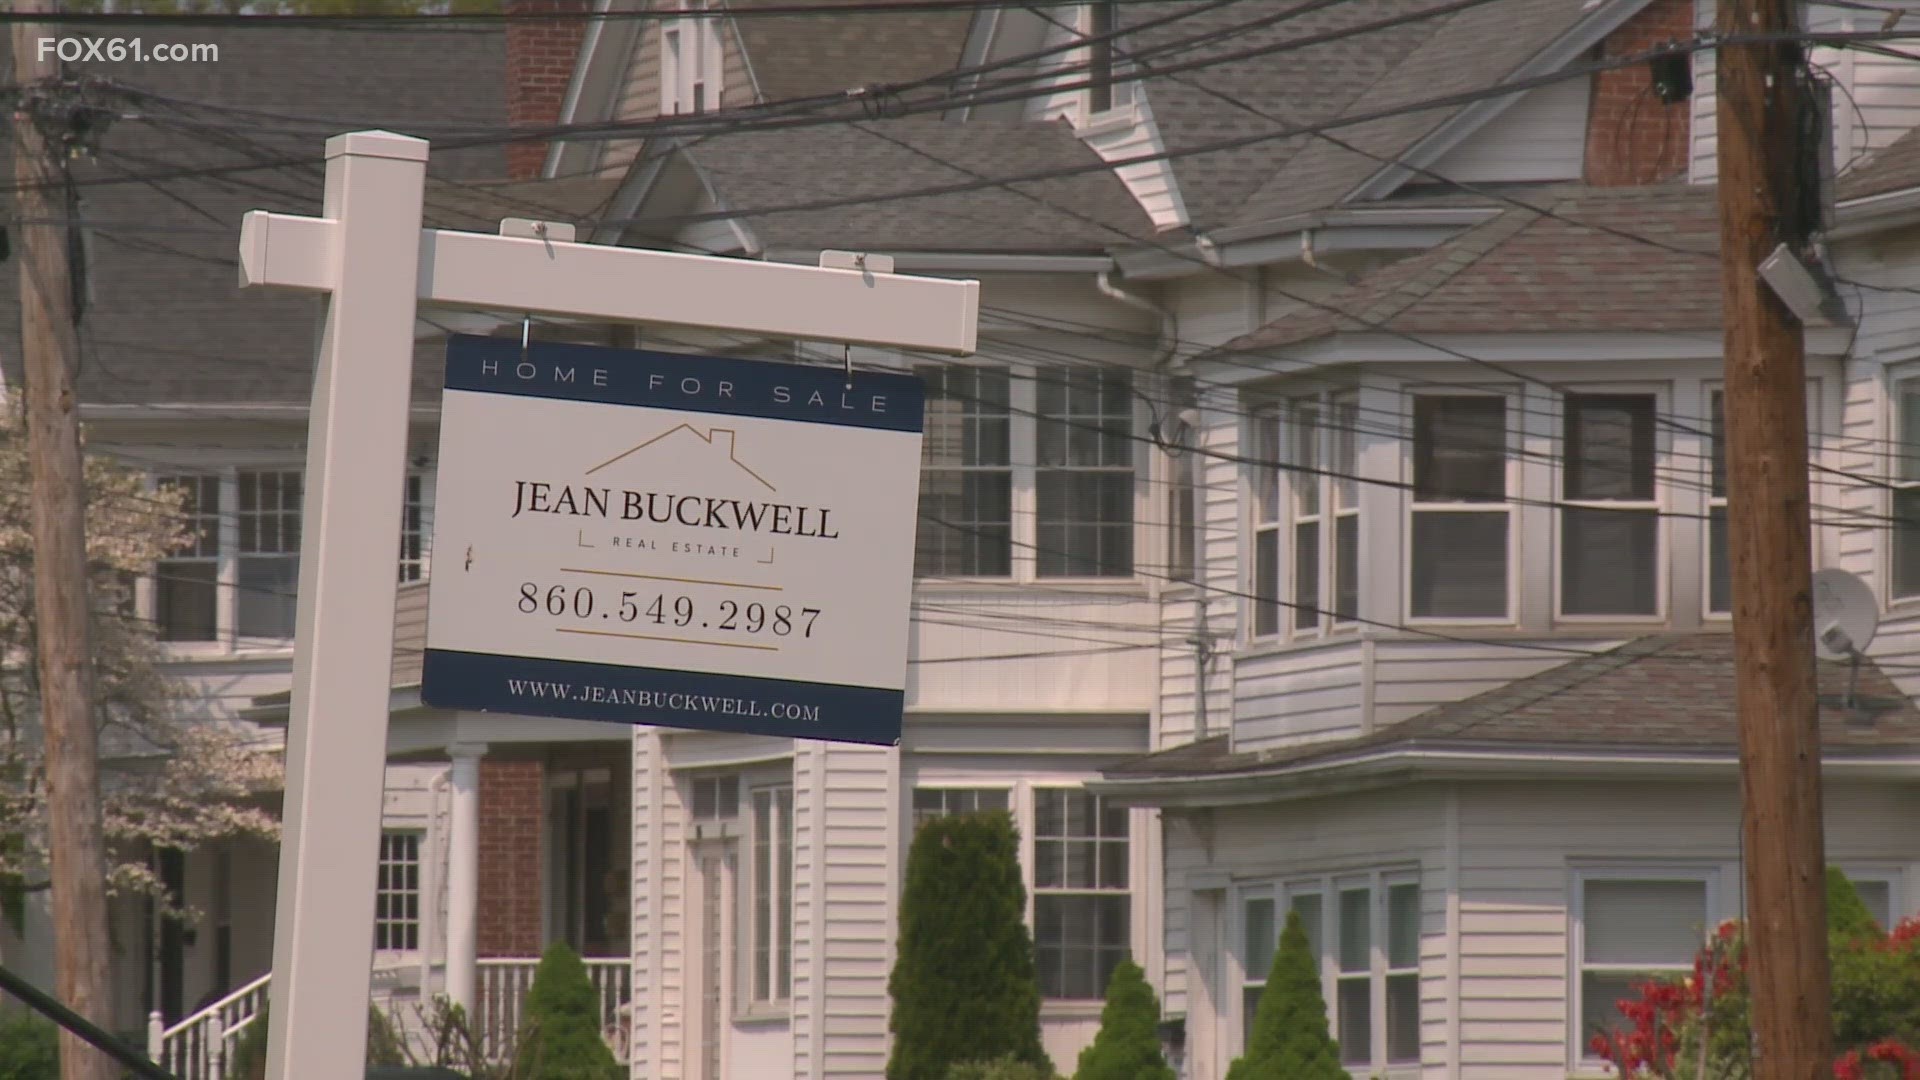 The state of Connecticut has recently rolled out financial assistance programs for both homeowners and renters.